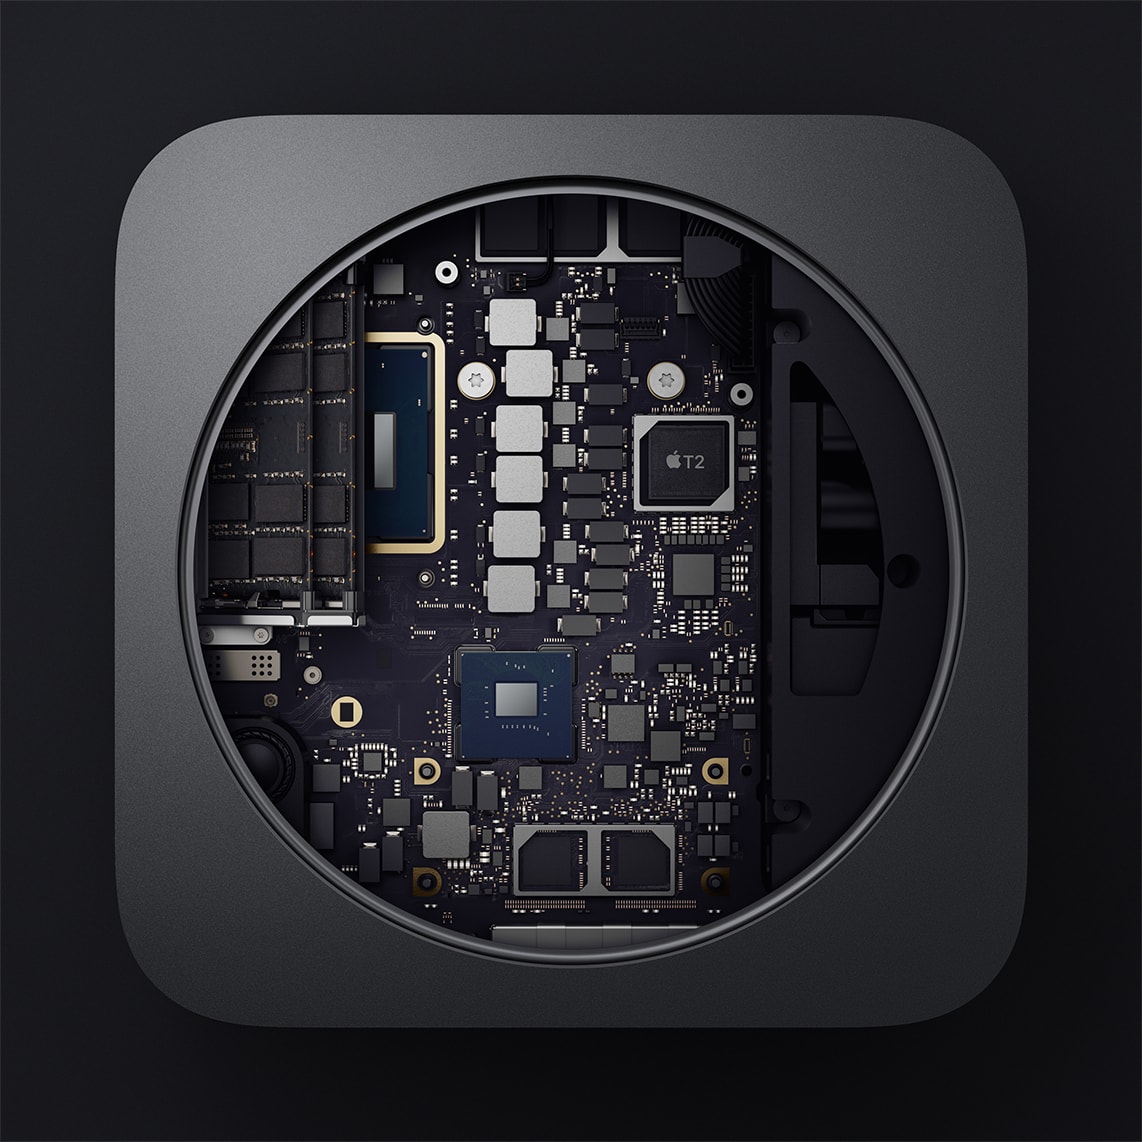 Interior of the new Mac mini (components and parts)